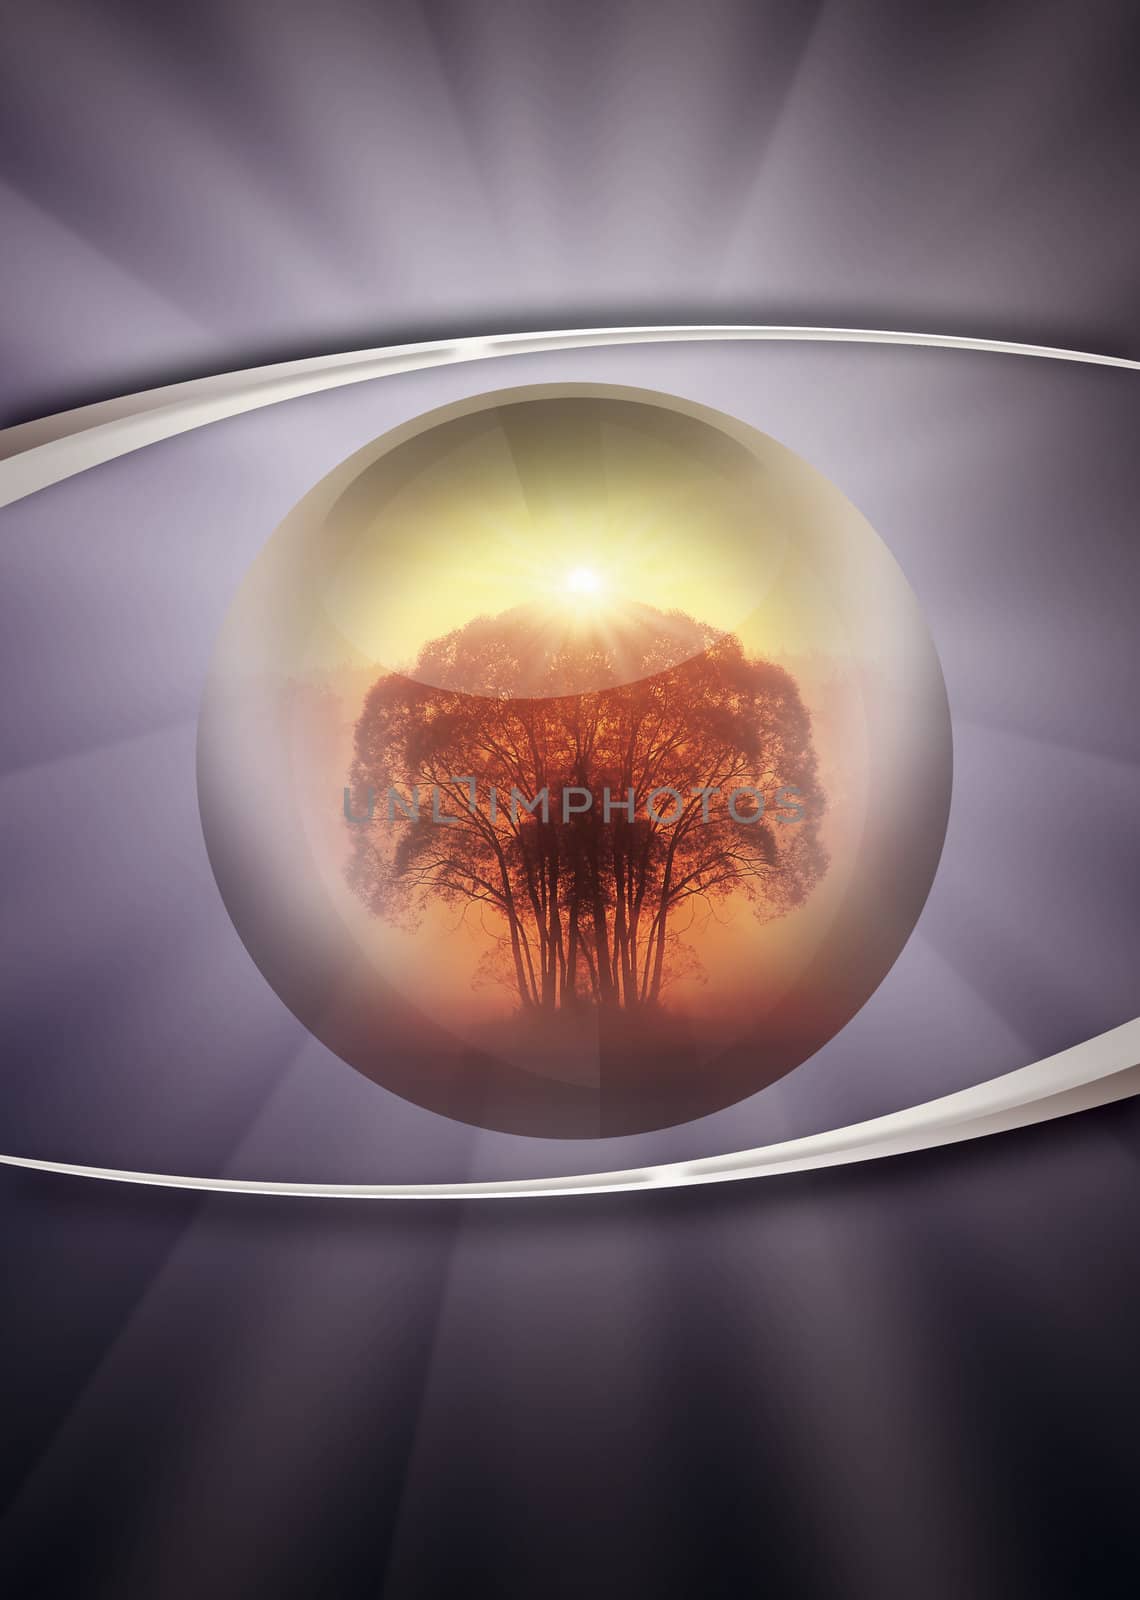 abstract illustration of the human eye with tree in the view